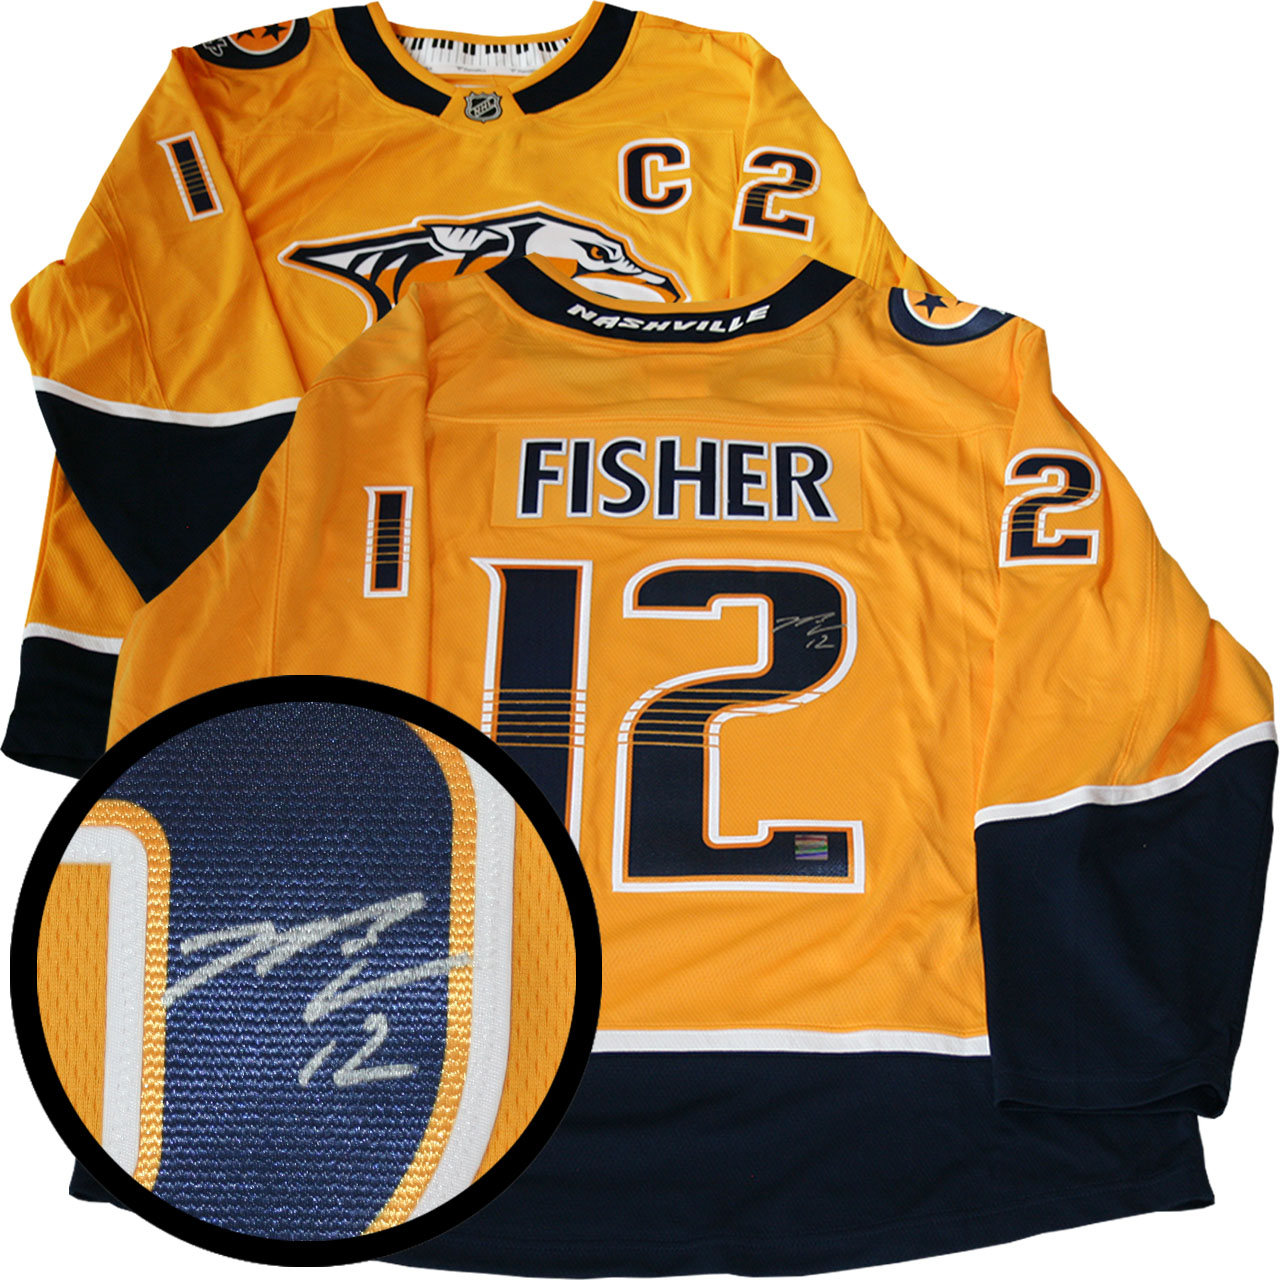 mike fisher jersey number